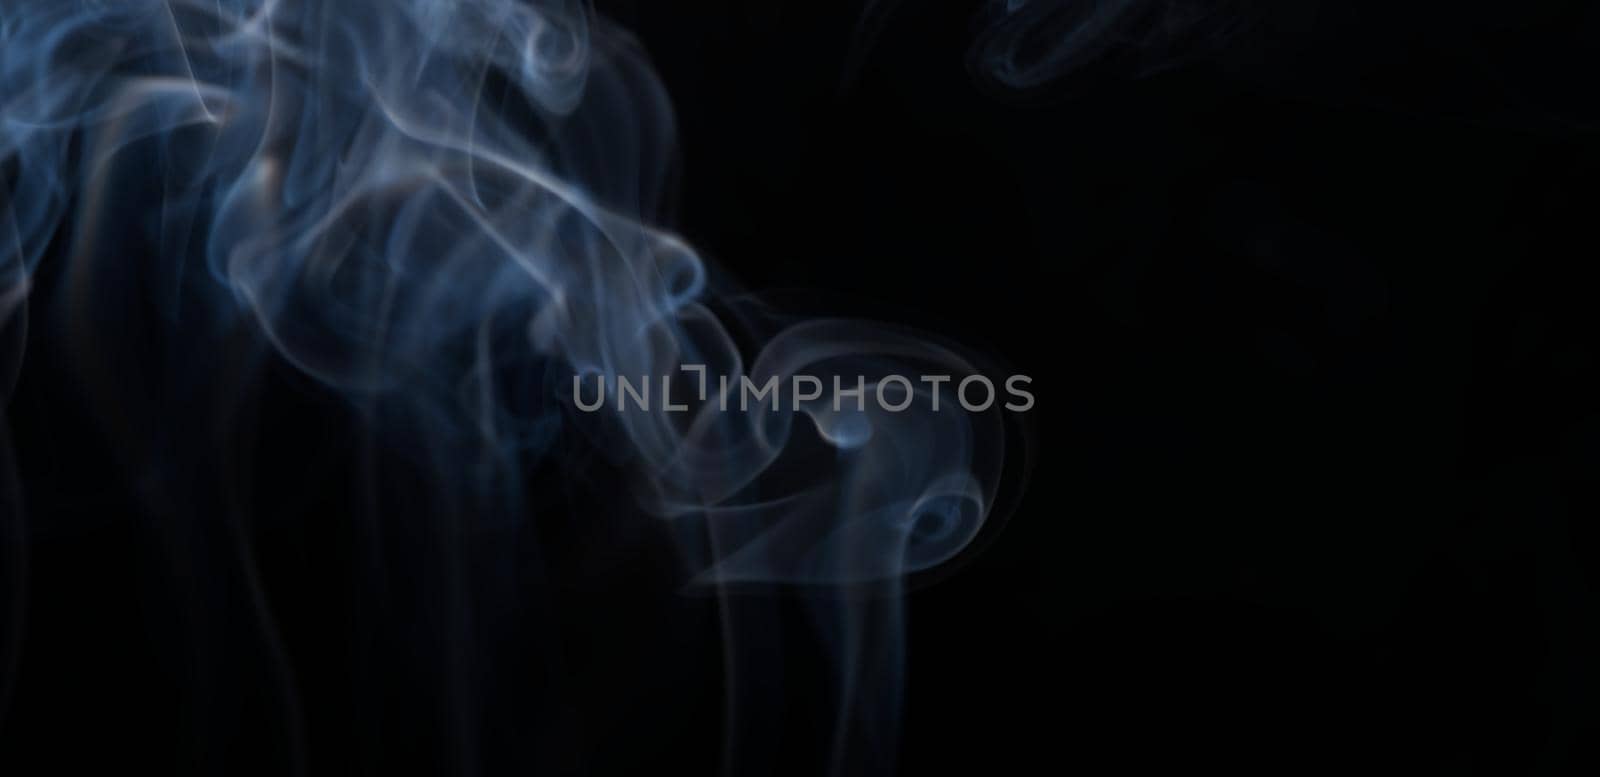 Burning incense, white smoke, black background, used as a worship background image, a sacred object of Buddhist beliefs, focus on the smoke. by noppha80